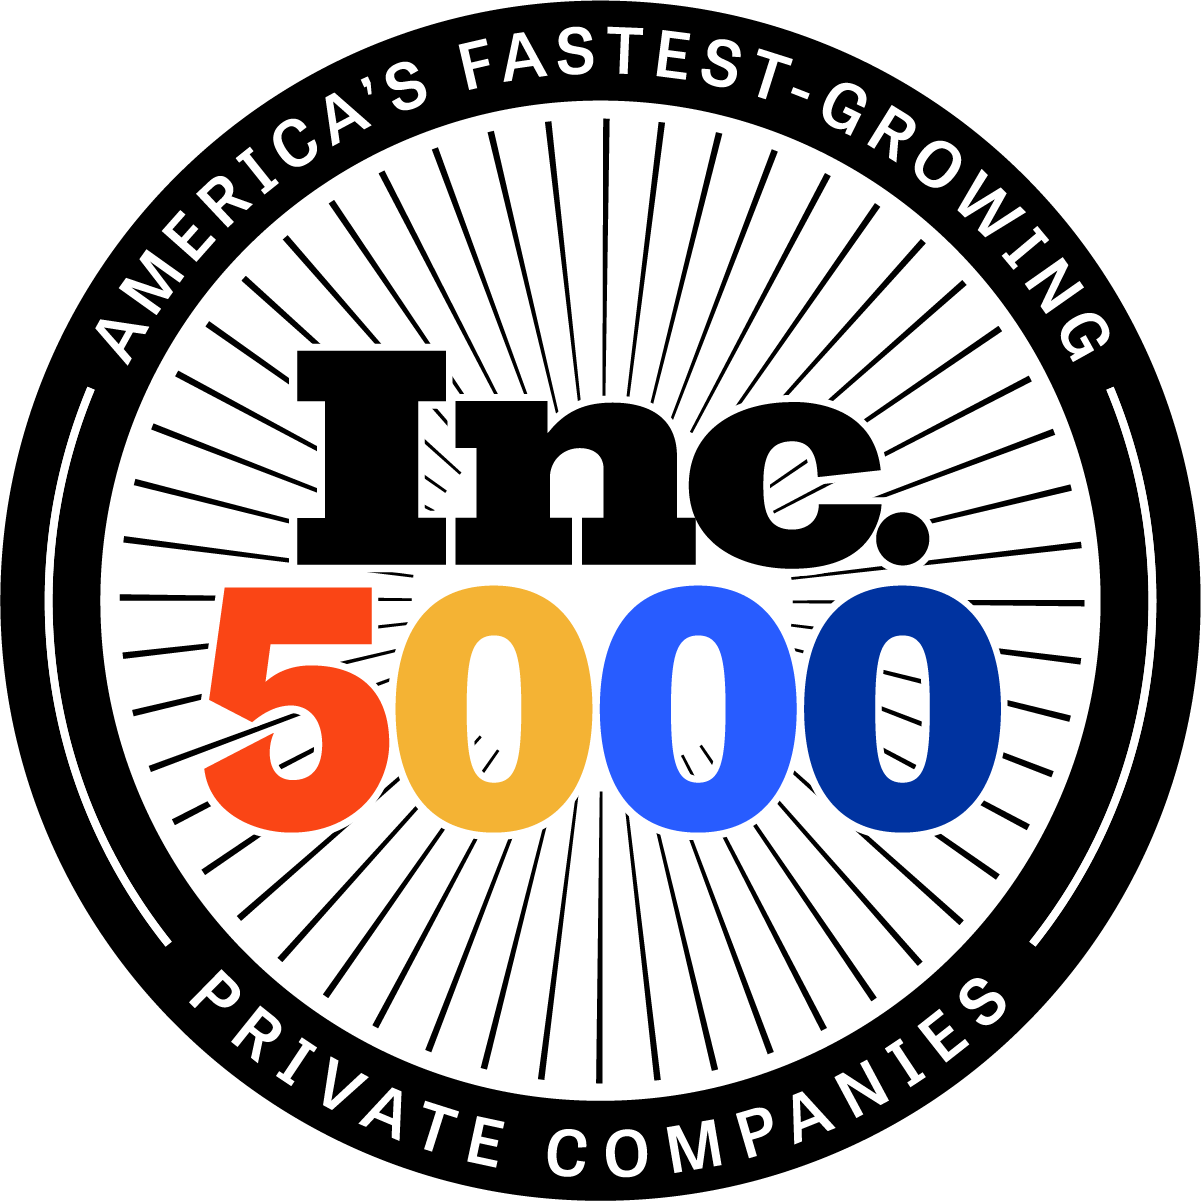 Modality Solutions also made the 2020 Inc. 5000 list of the nation's fastest-growing privately held companies for the second consecutive year.